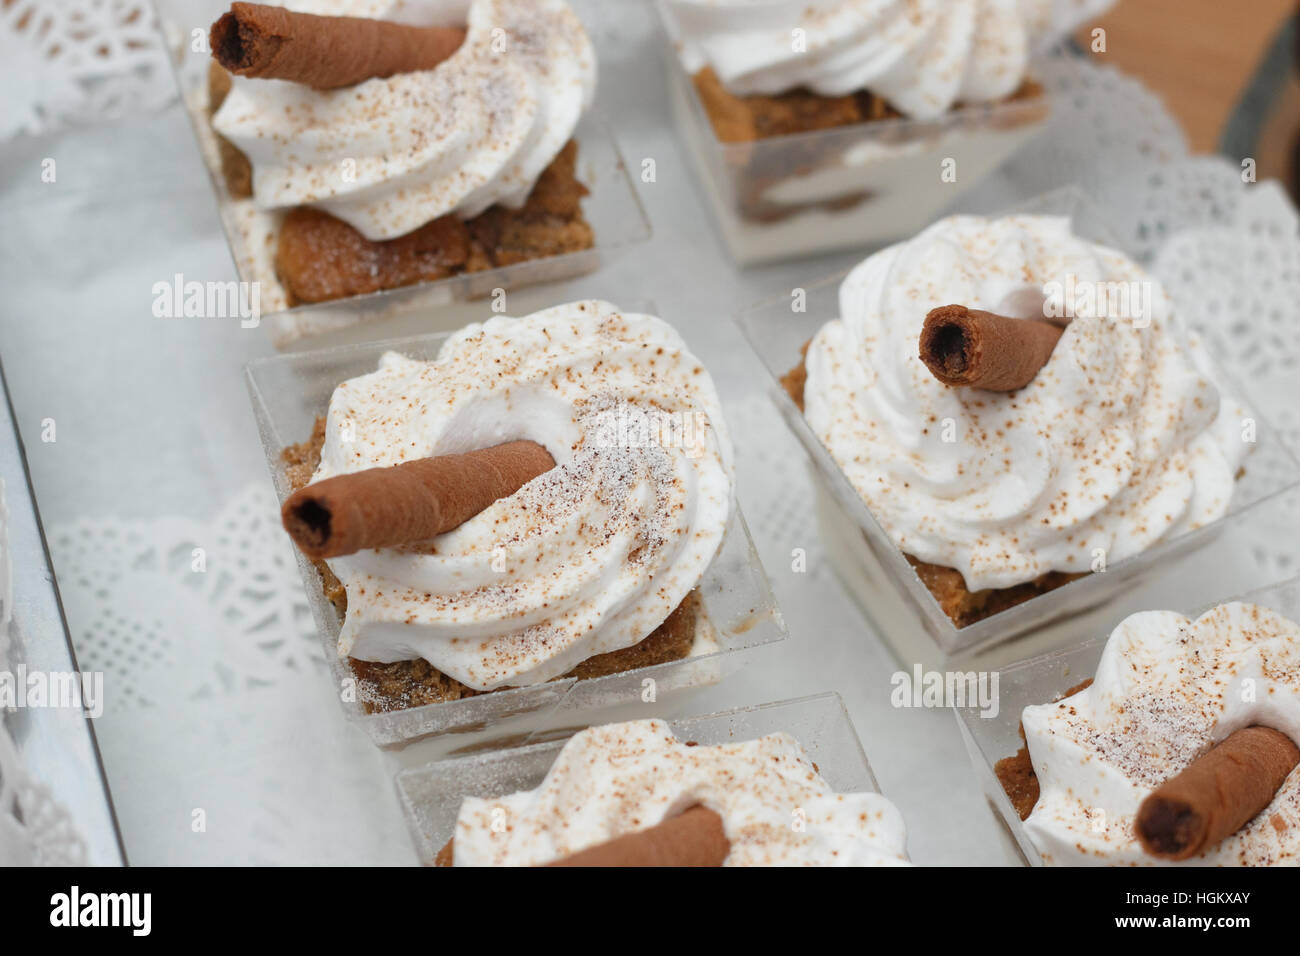 Chocolate rolls dessert with whipped cream shot in artificial light Stock Photo